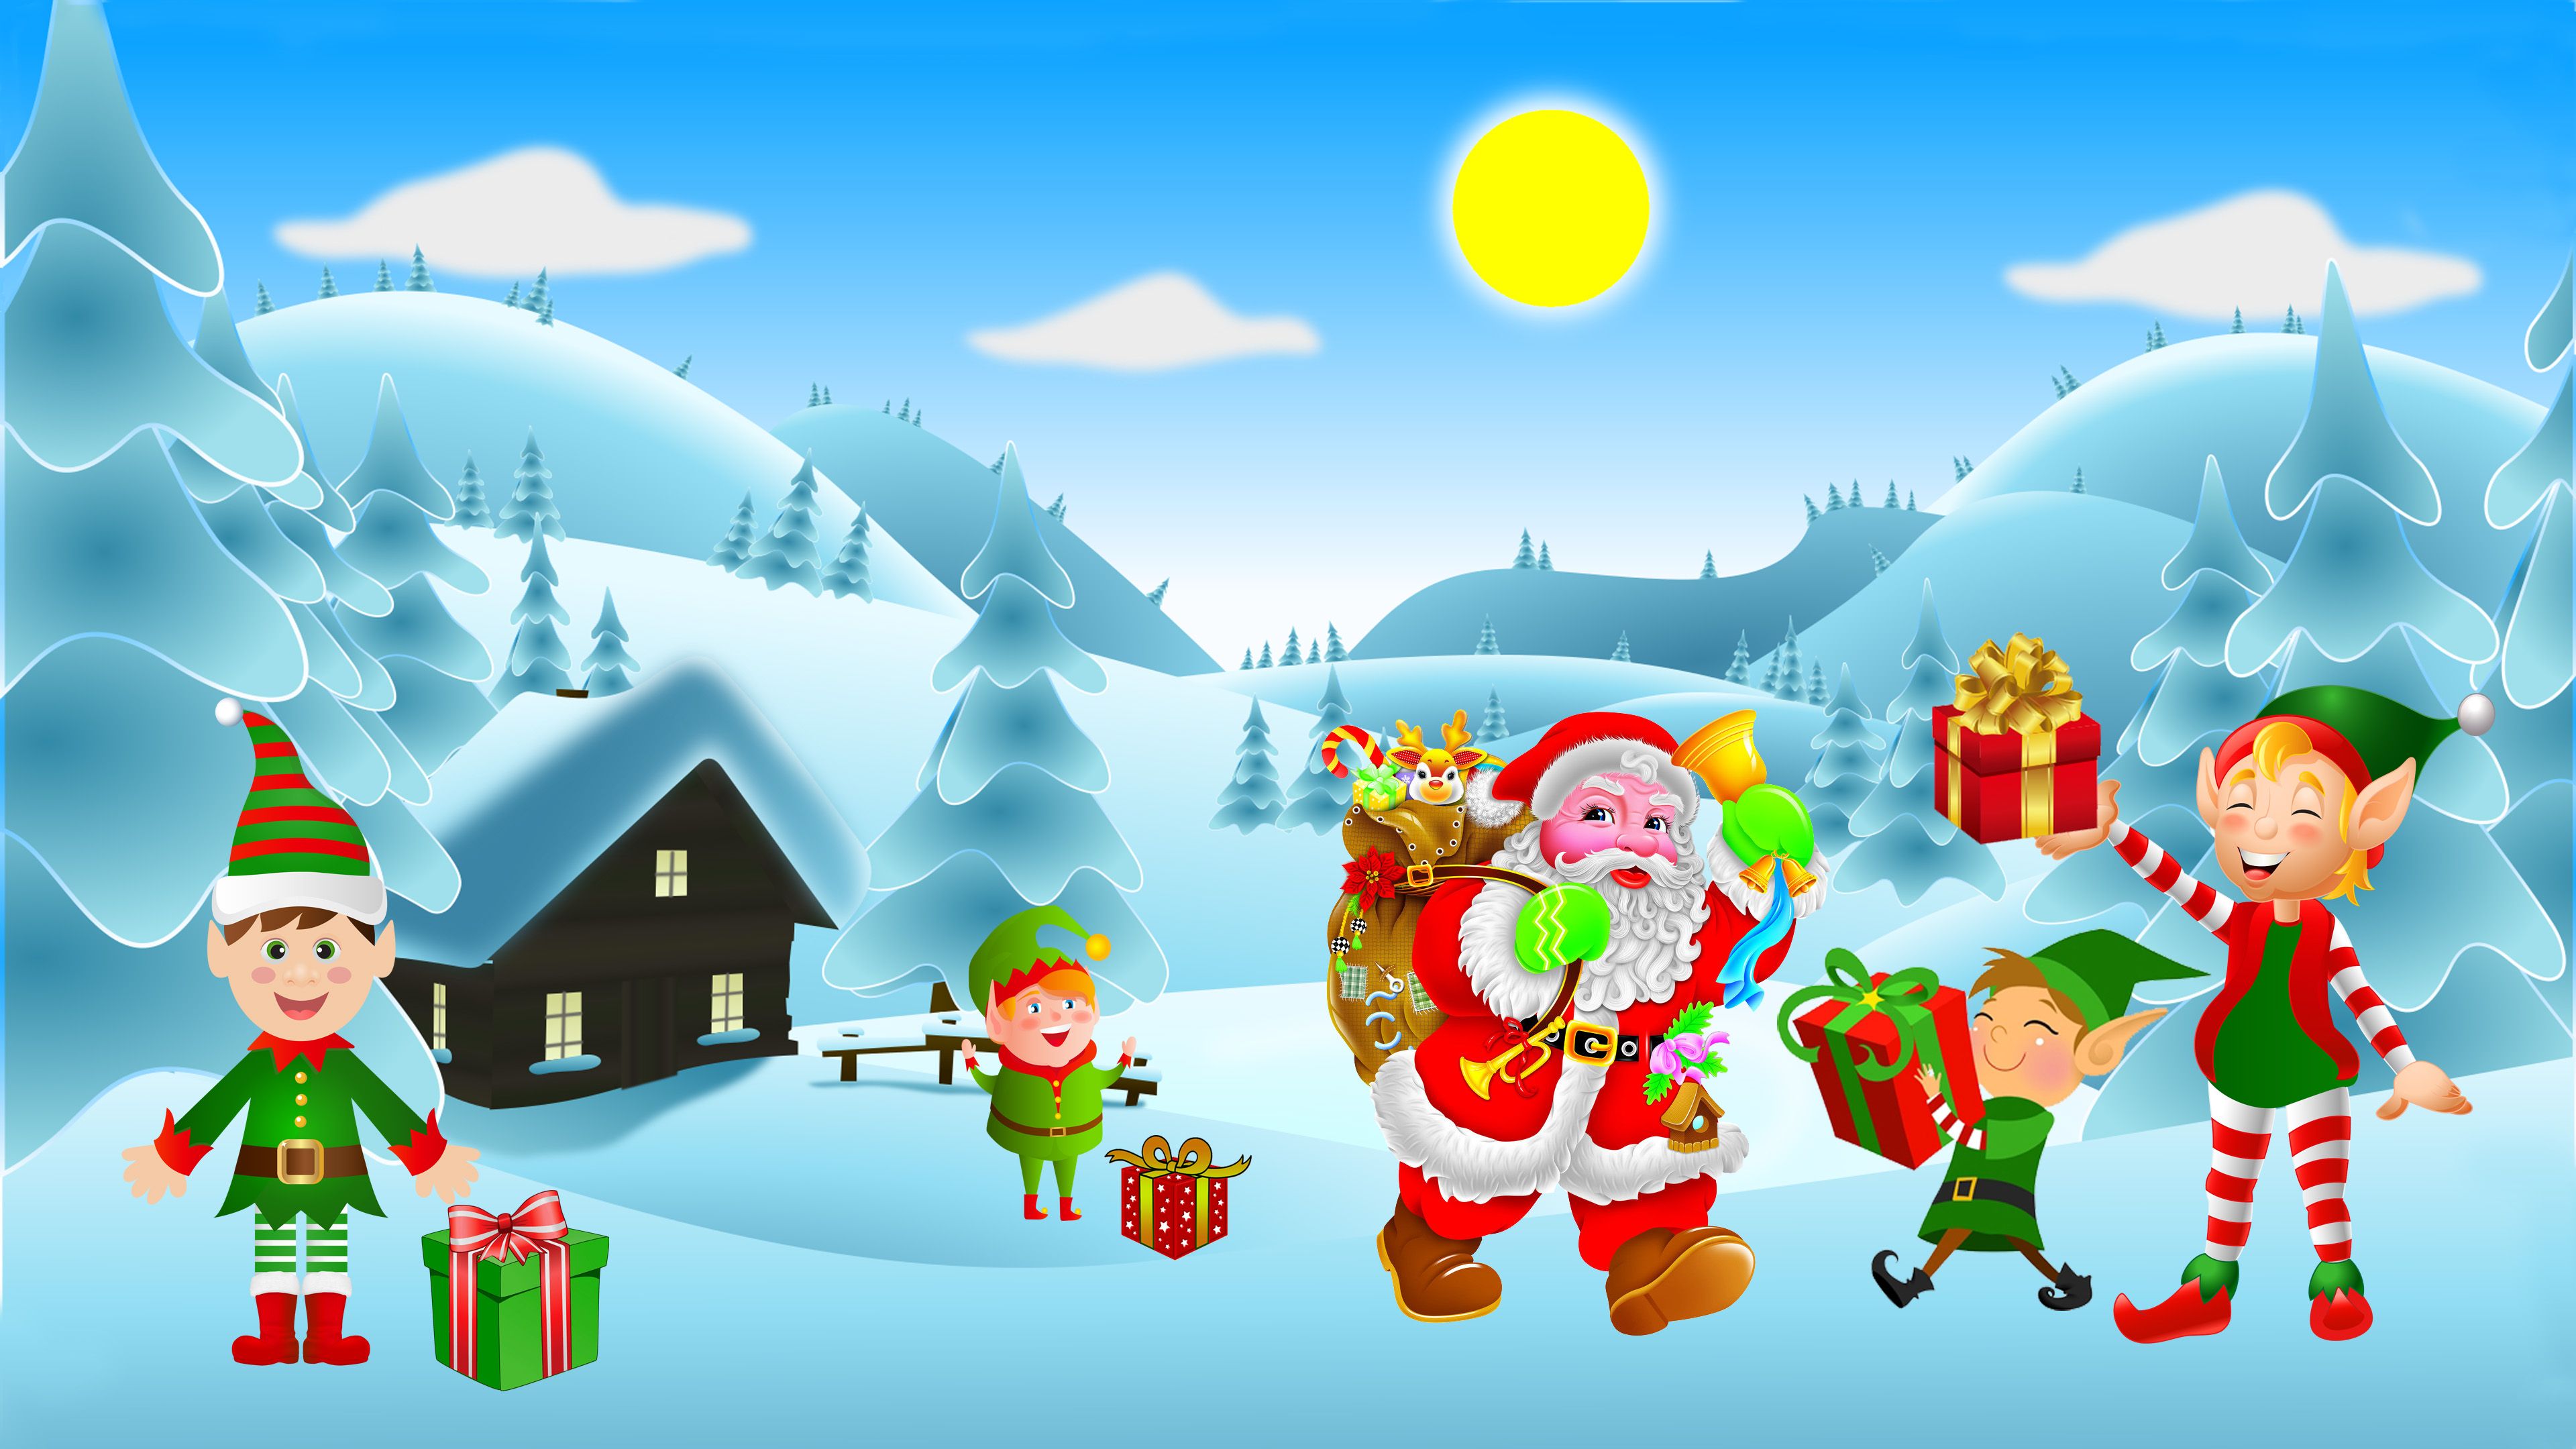 Merry Christmas Winter Snow Cheerful Kids With Christmas Gifts From Santa Claus Clip Art New Year Wallpaper HD For Desktop Mobile Phones Tablet And Tv 3840x2160, Wallpaper13.com